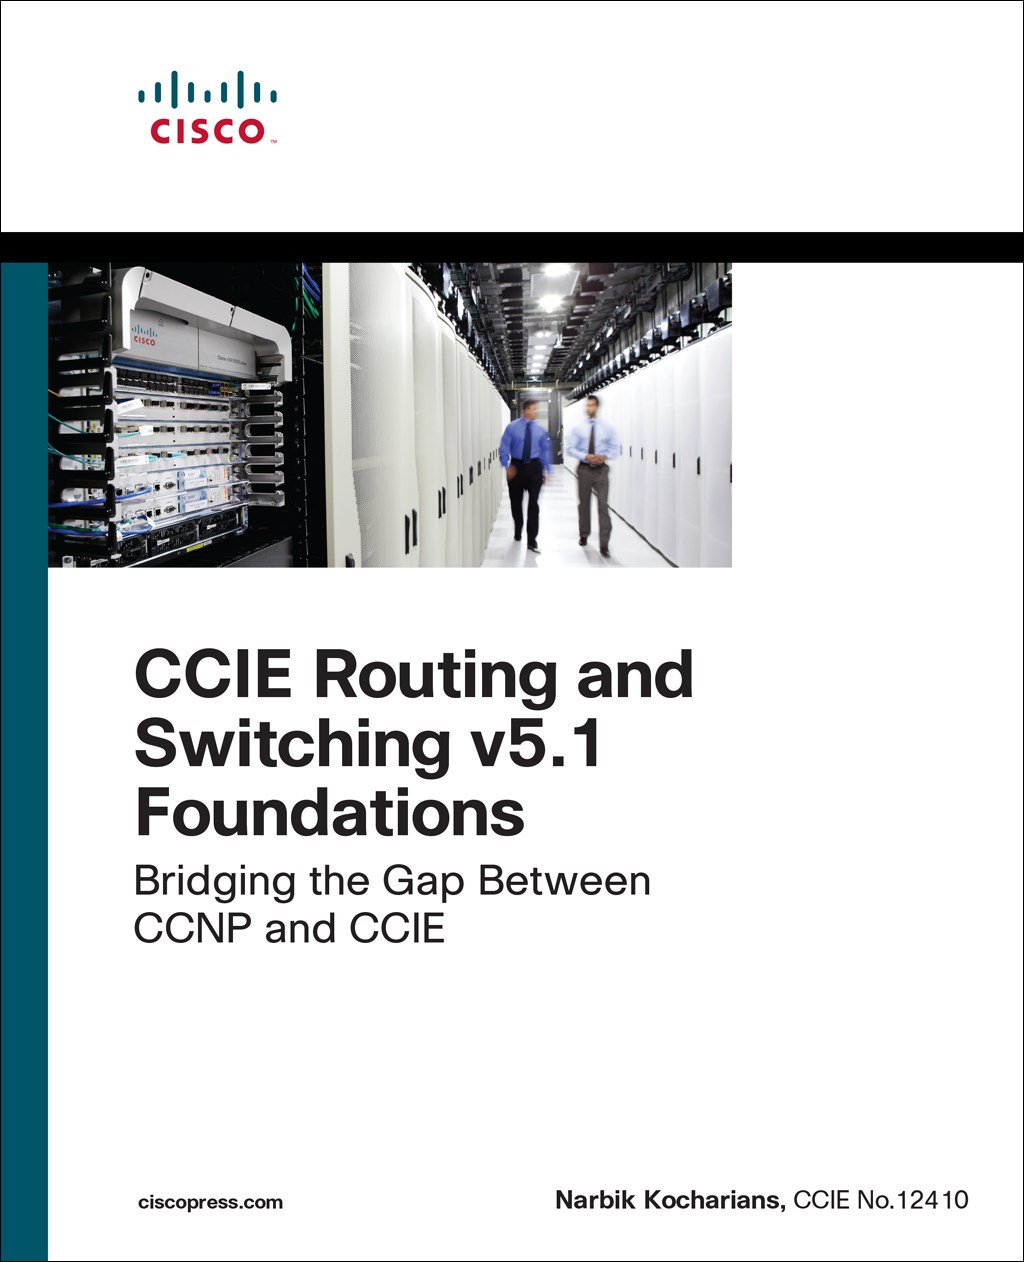 CCIE Routing and Switching v5.1 Foundations: Bridging the Gap Between CCNP and CCIE